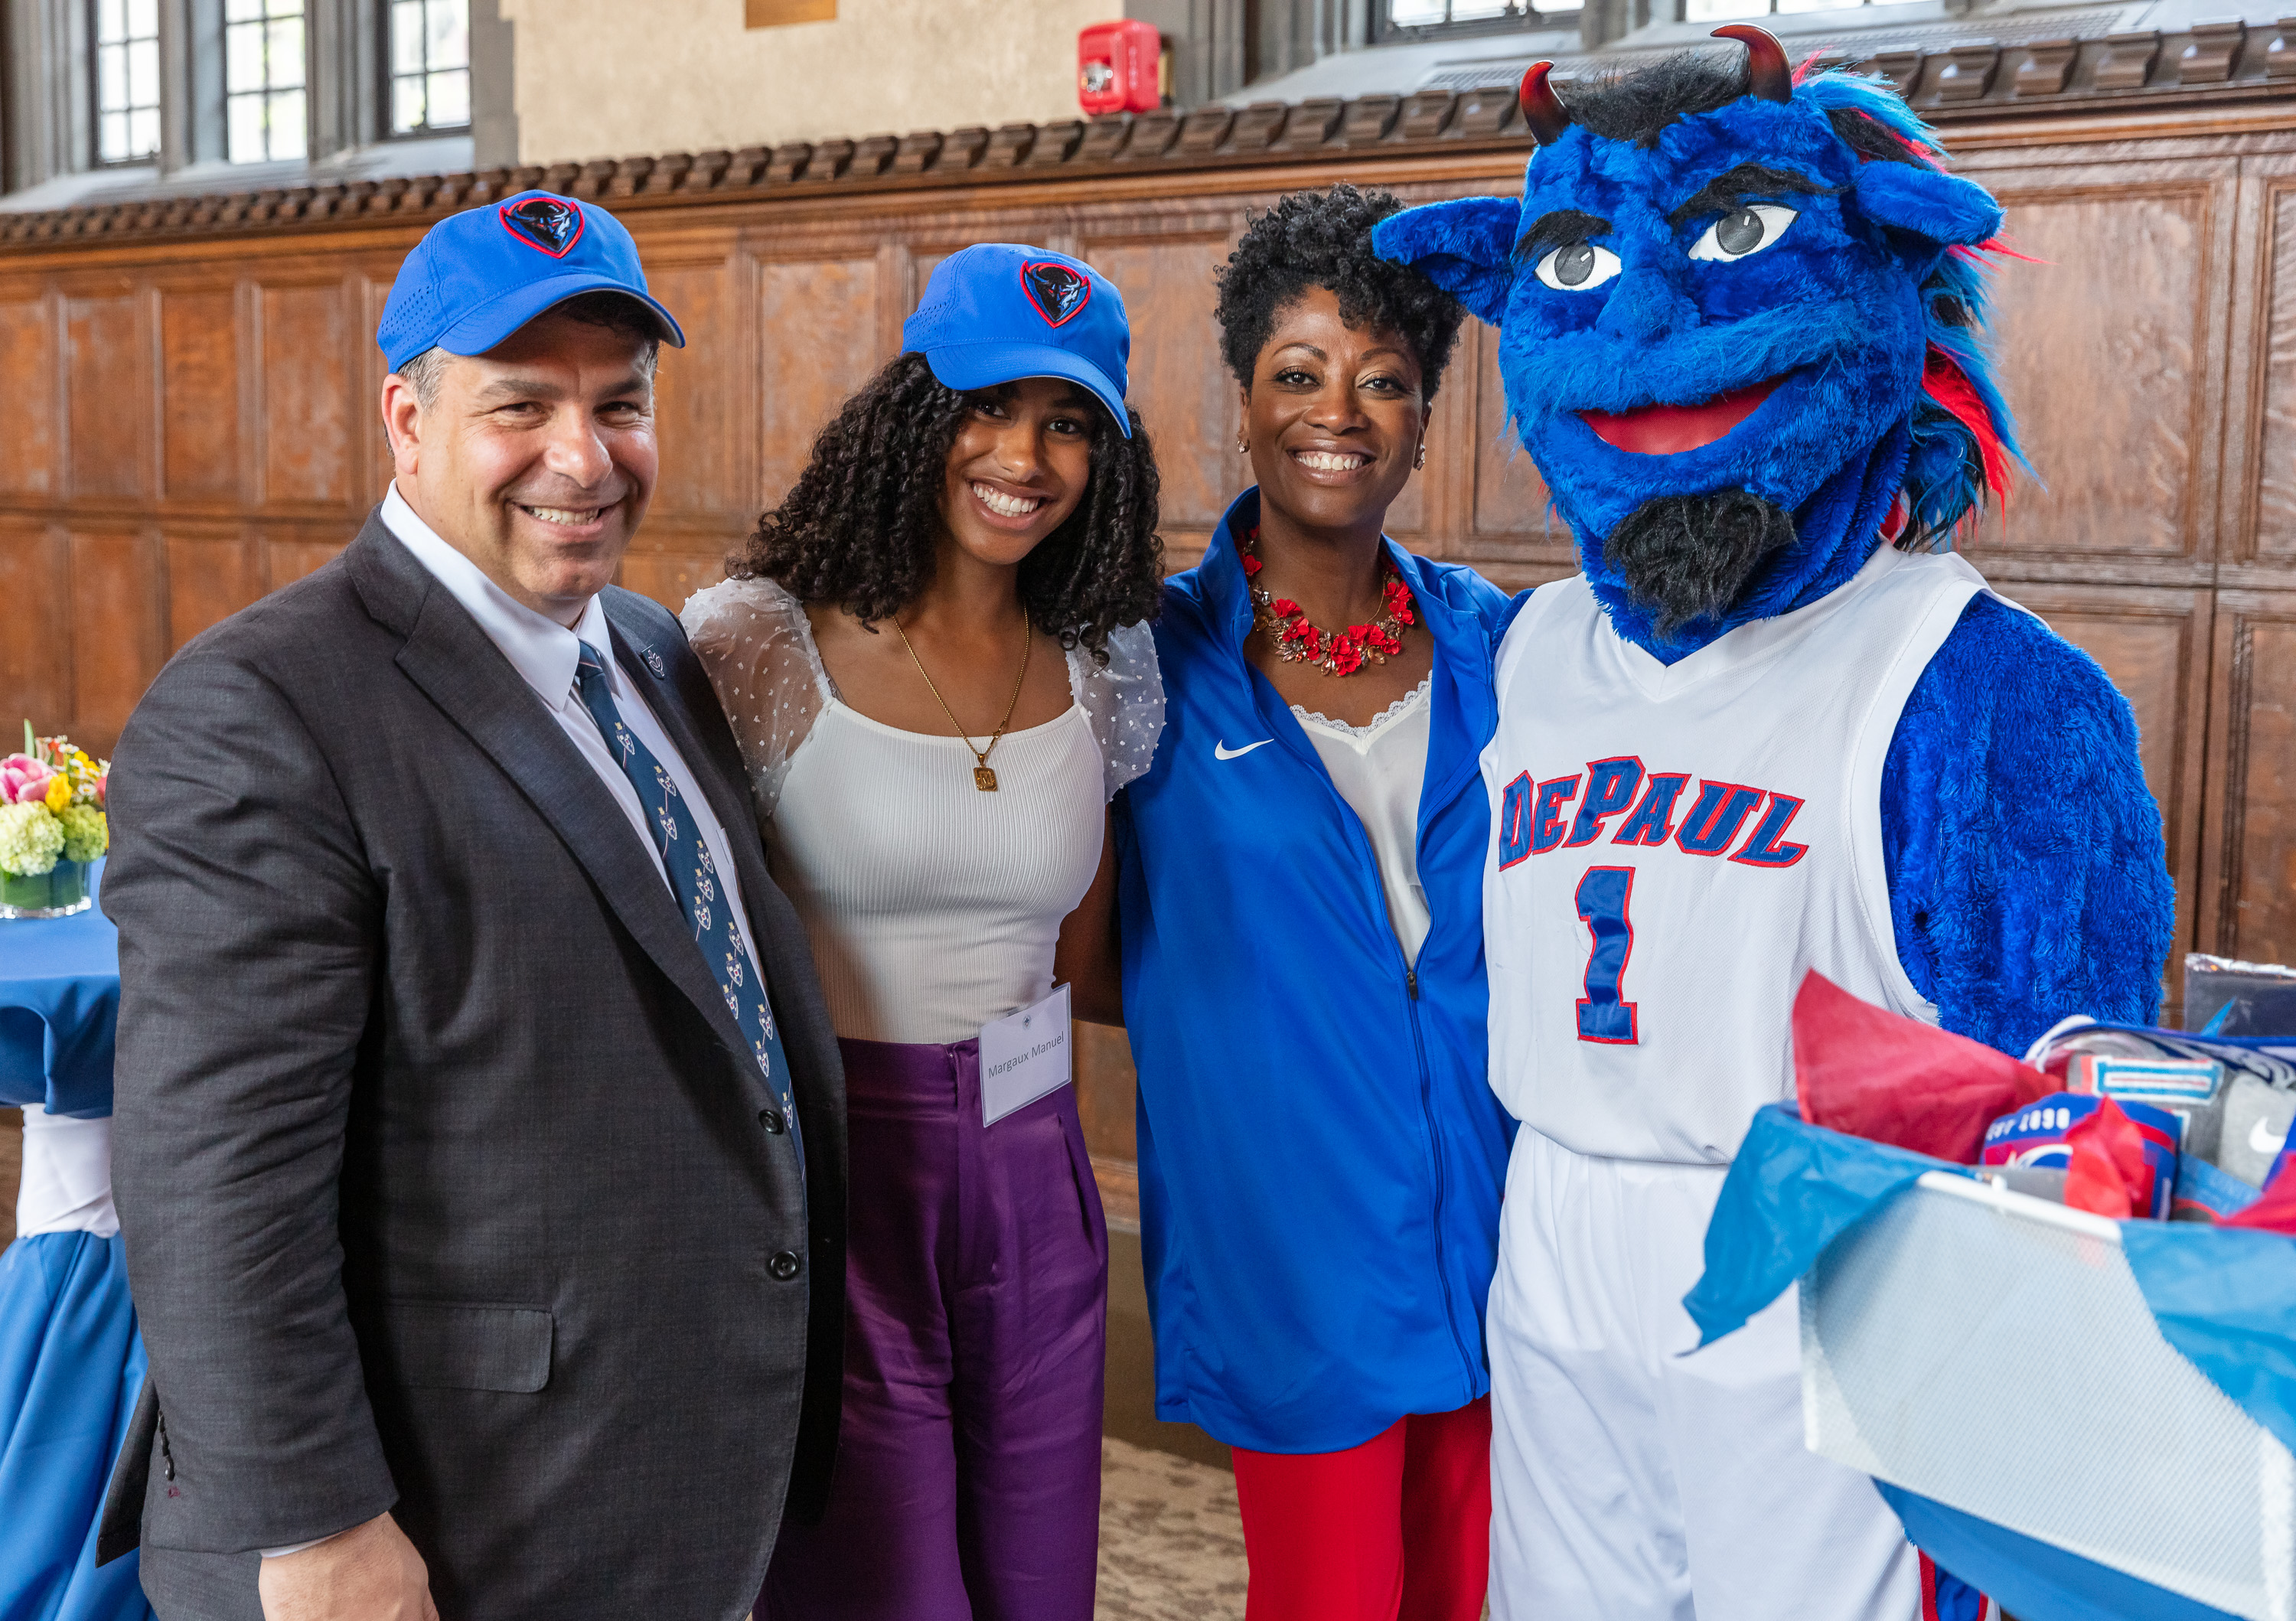 DIBS, DePaul's mascot, stopped by the Lincoln Park Campus to welcome President-elect Robert Manuel and his family to the university community. (DePaul University/Randall Spriggs)